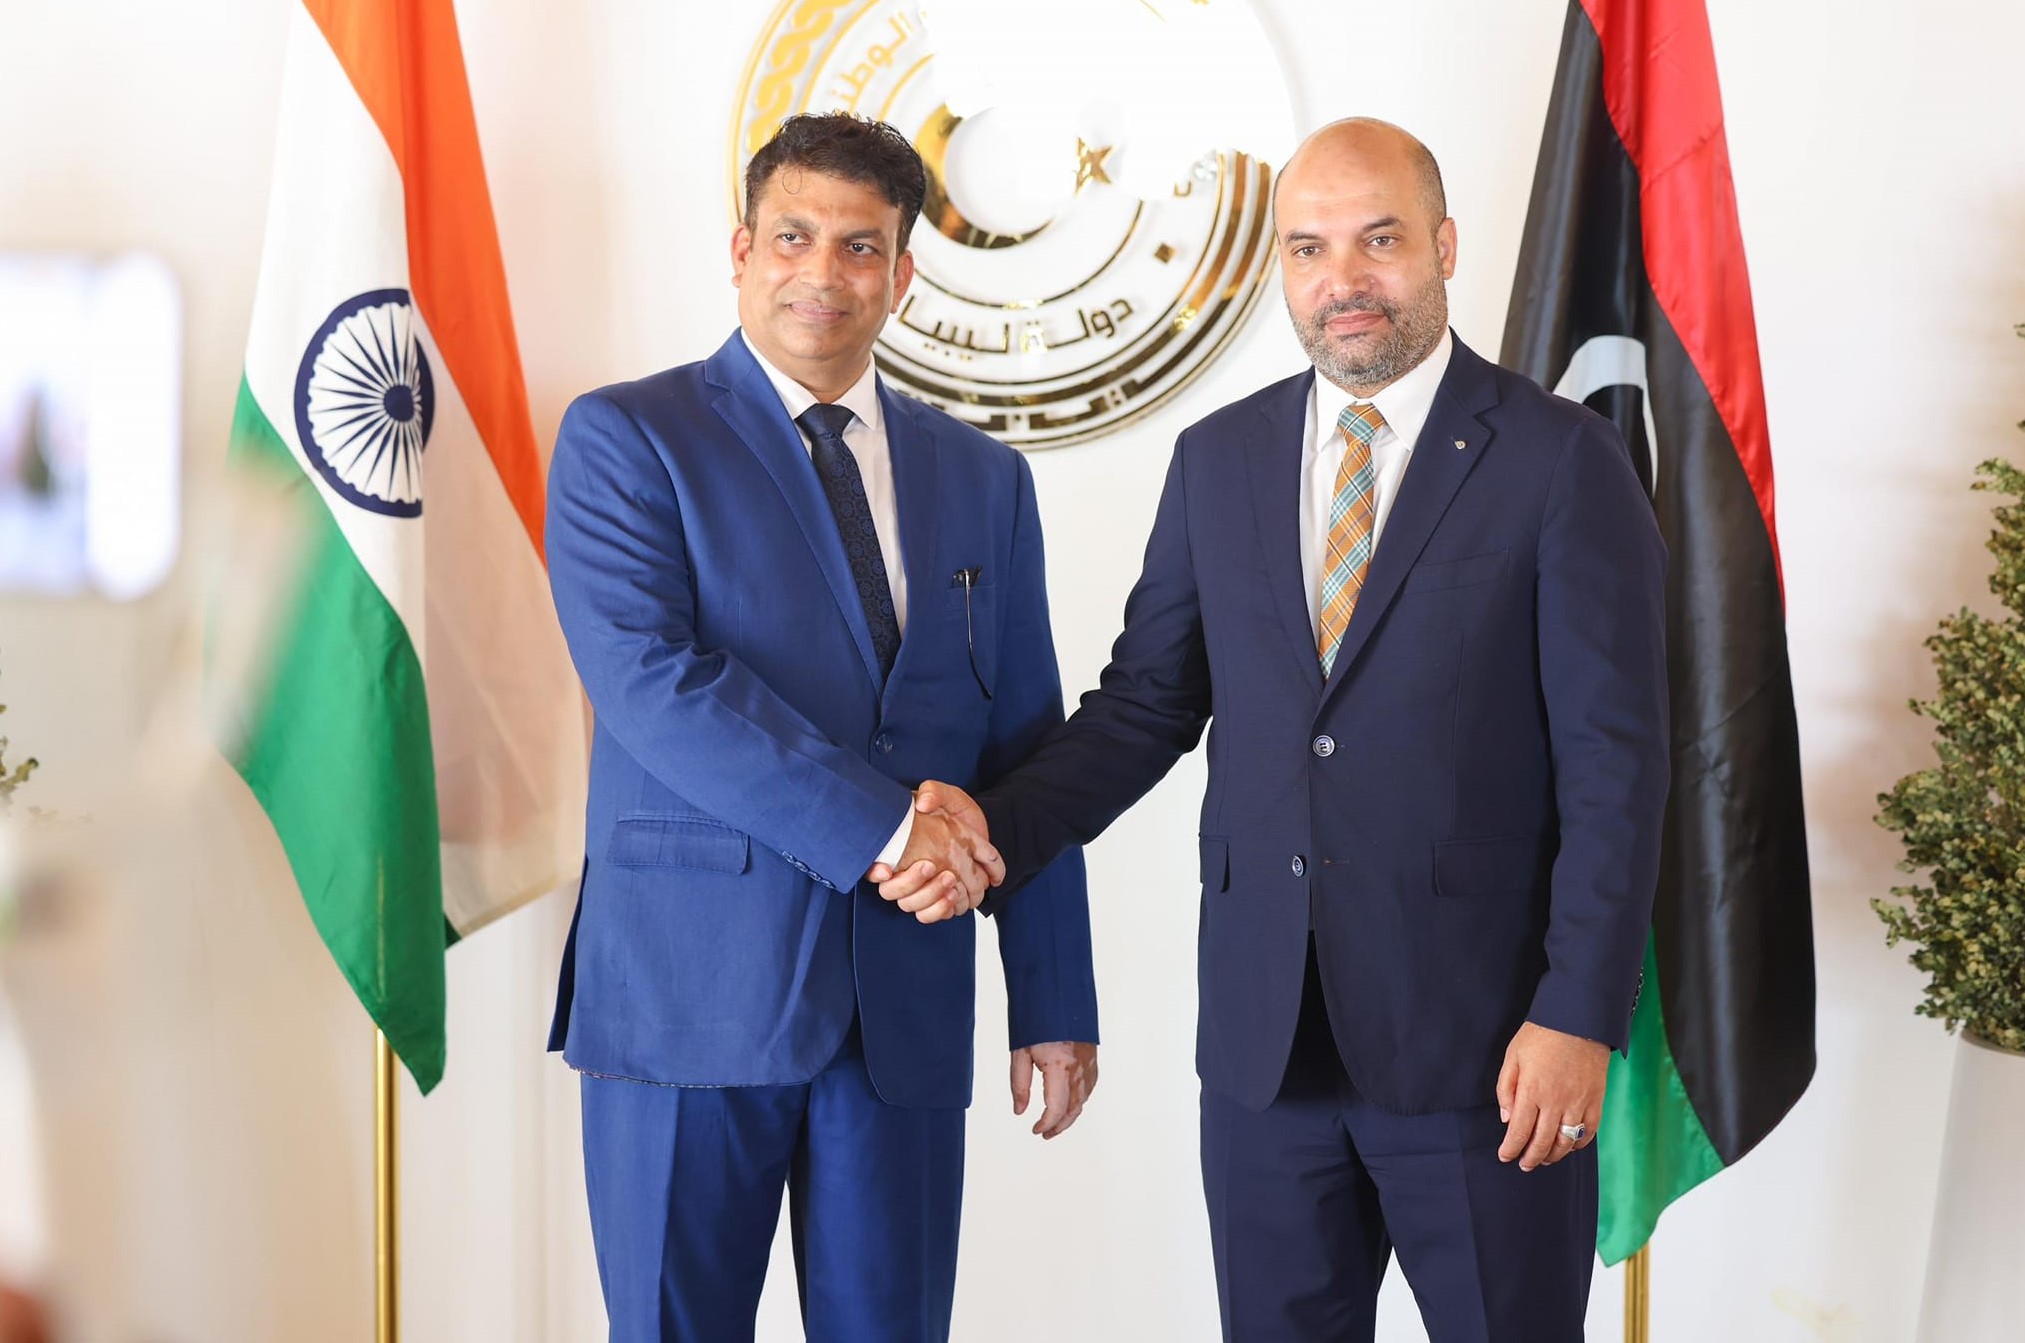 Resumption of work of the Indian Embassy from the capital, Tripoli.